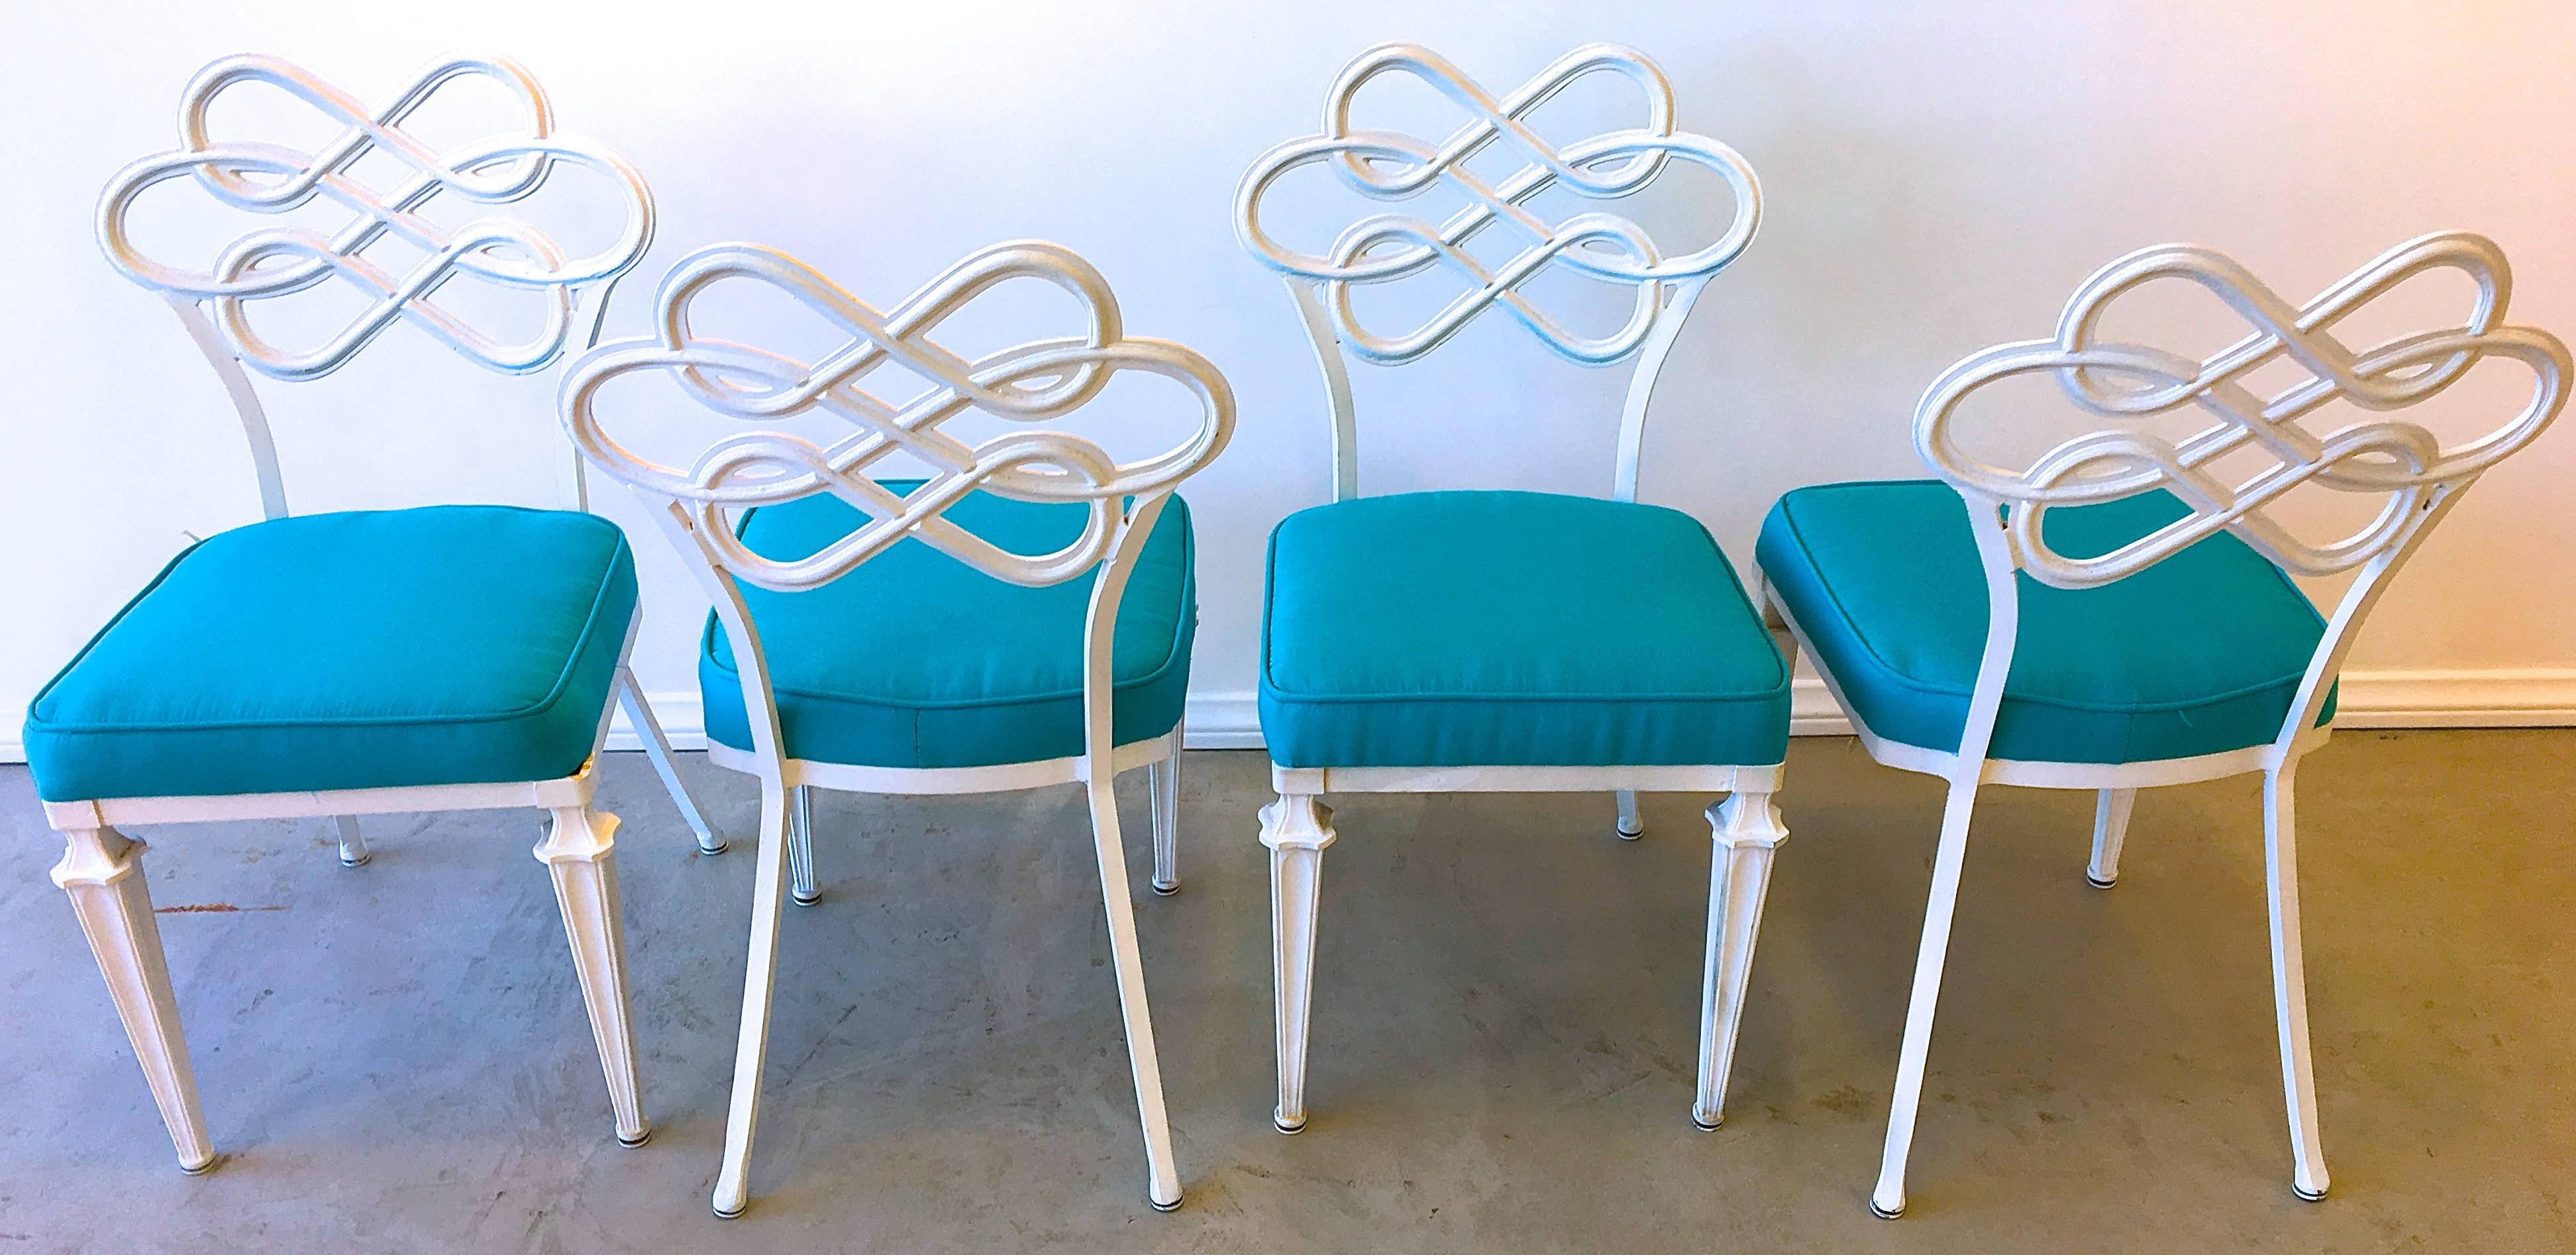 Mid-Century aluminium dining chairs epitomize the Hollywood Regency look with lyrical intertwining backs and neoclassic legs. The satin white finish juxtaposed with brilliant aqua sunbrella canvas lends a fresh look for dining indoors or on a